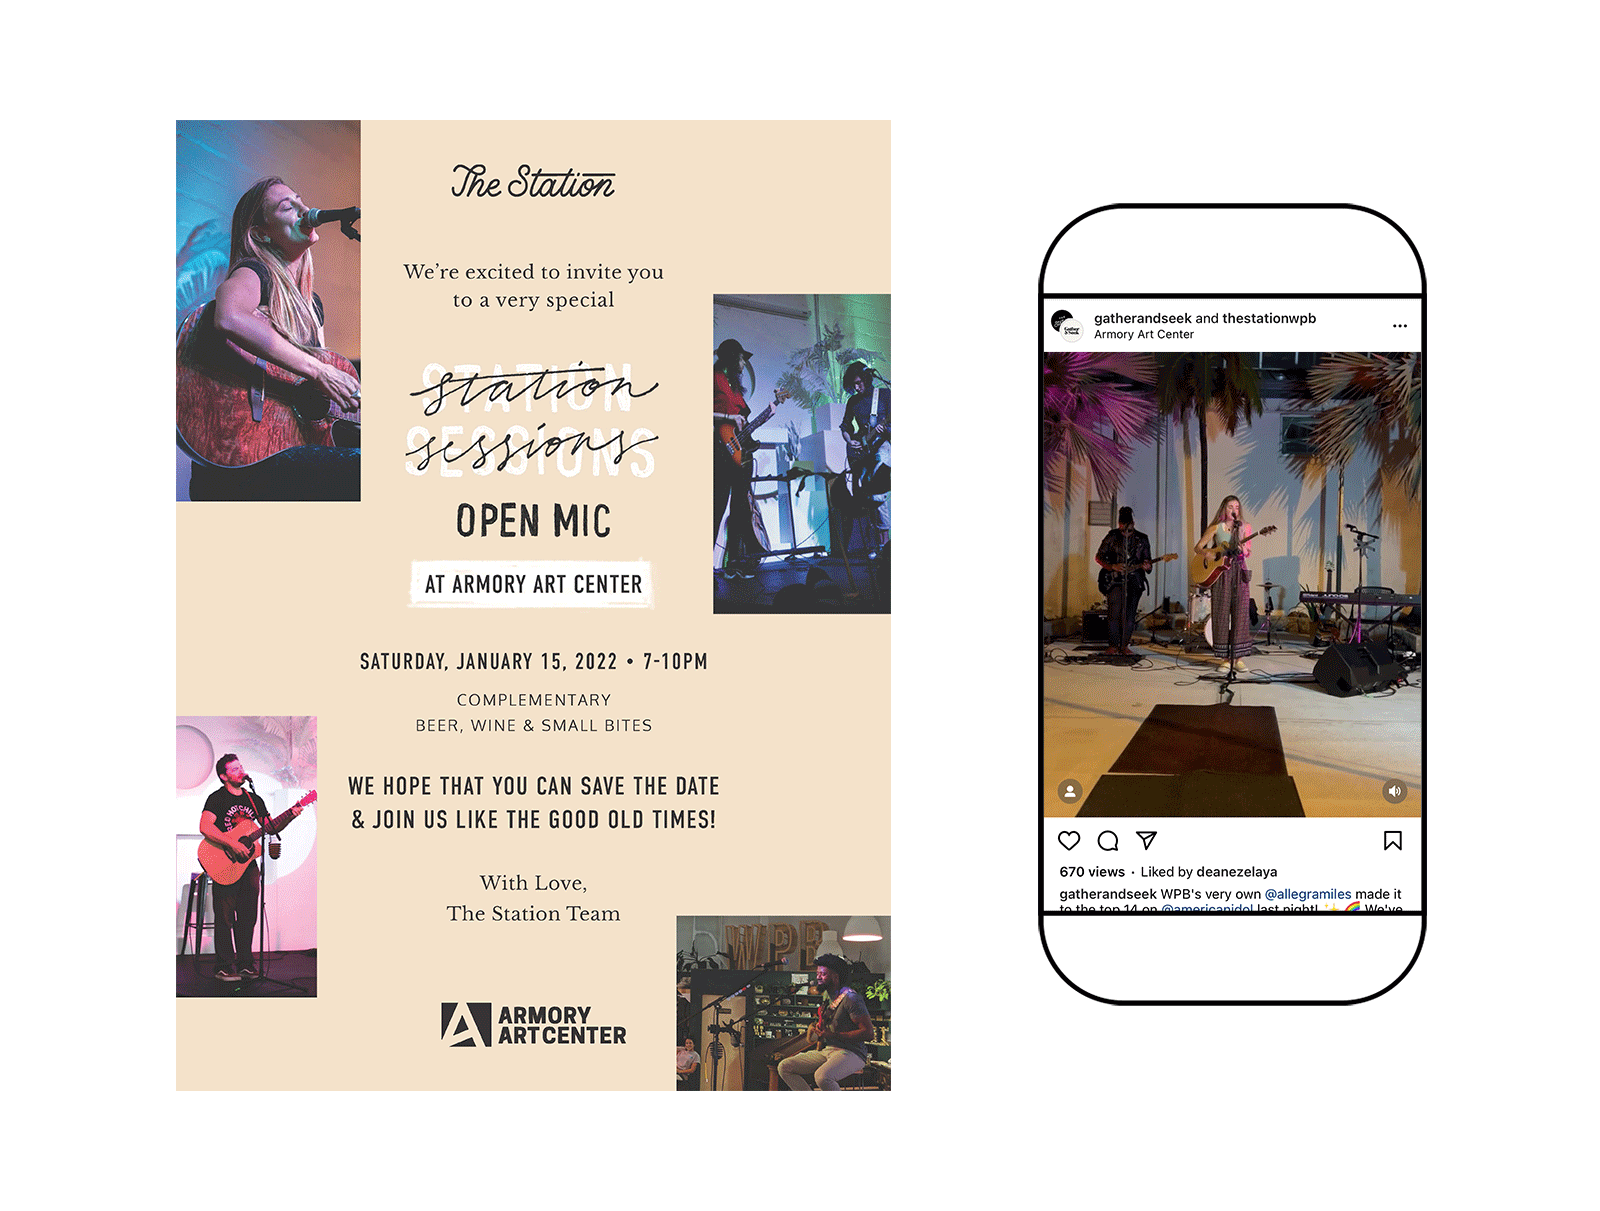 Invitation flyer design for Station Sessions open mic night at the Armory Art Center in West Palm Beach, next to a mobile mockup showing Gather & Seek and The Station's collaborated posts showcasing the musicians from the evening's event.